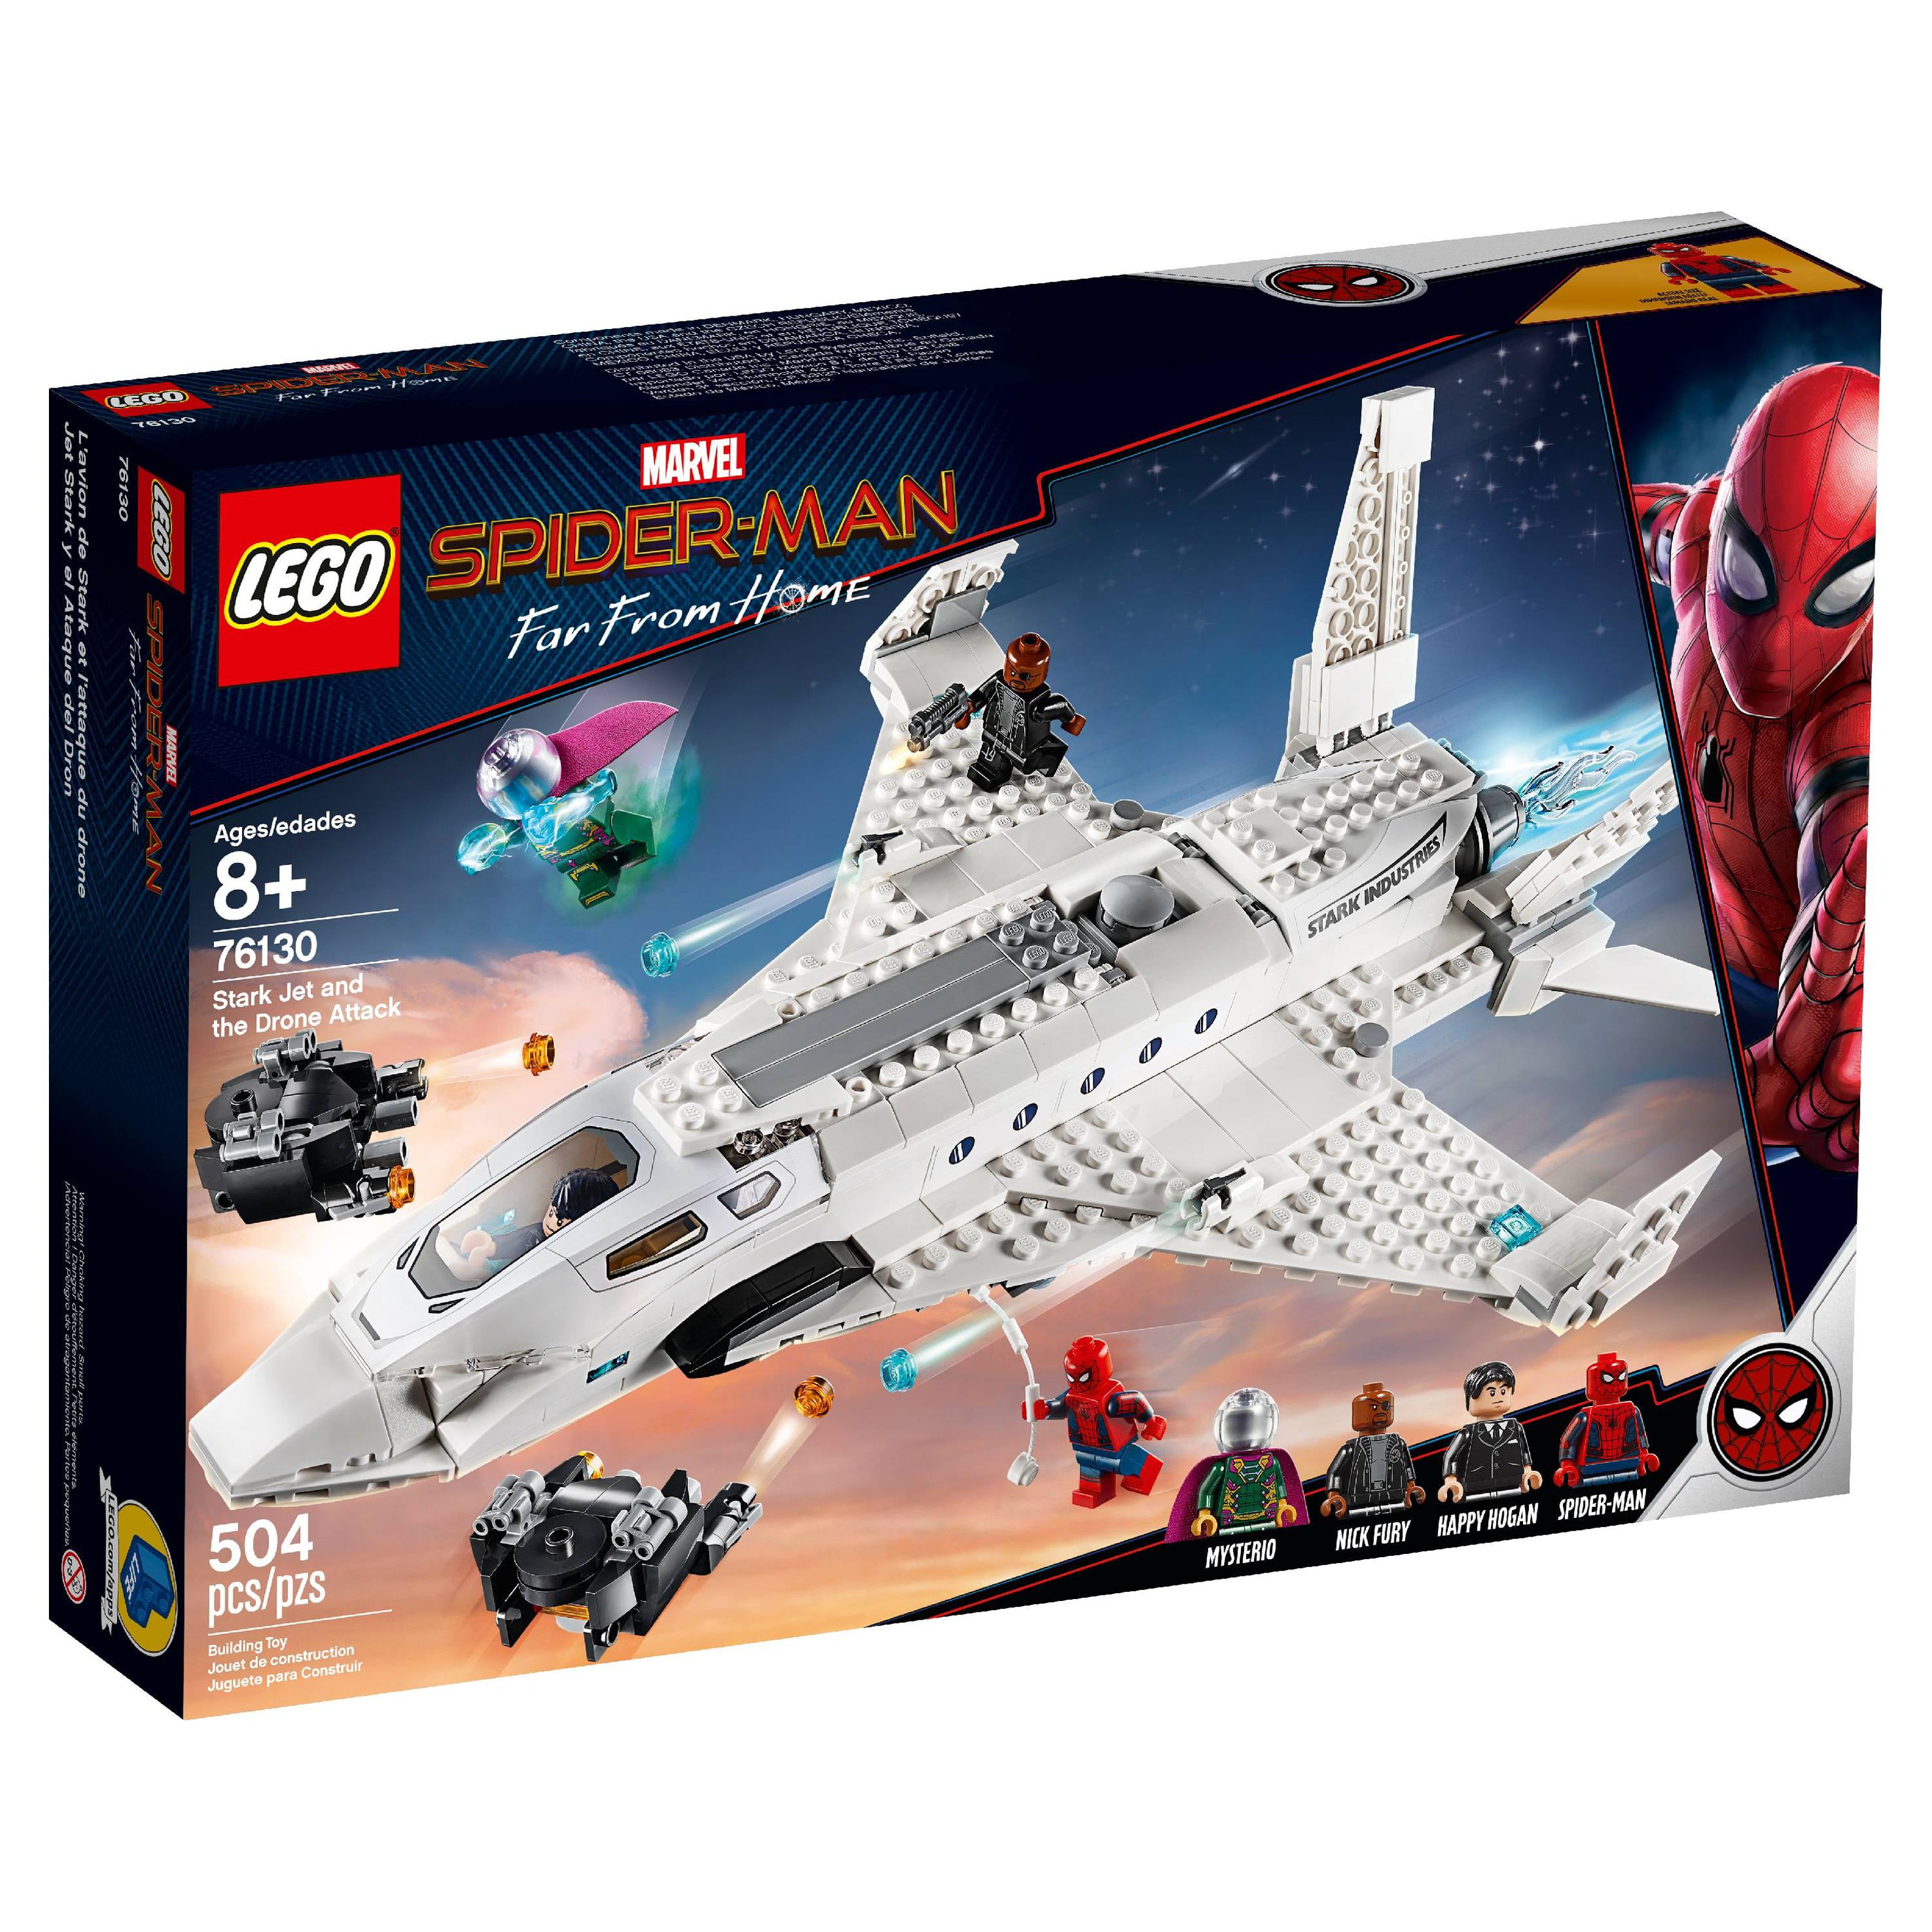 LEGO Marvel Spider-Man Far From Home: Stark Jet and the Drone Attack Superhero Set 76130 - image 4 of 7